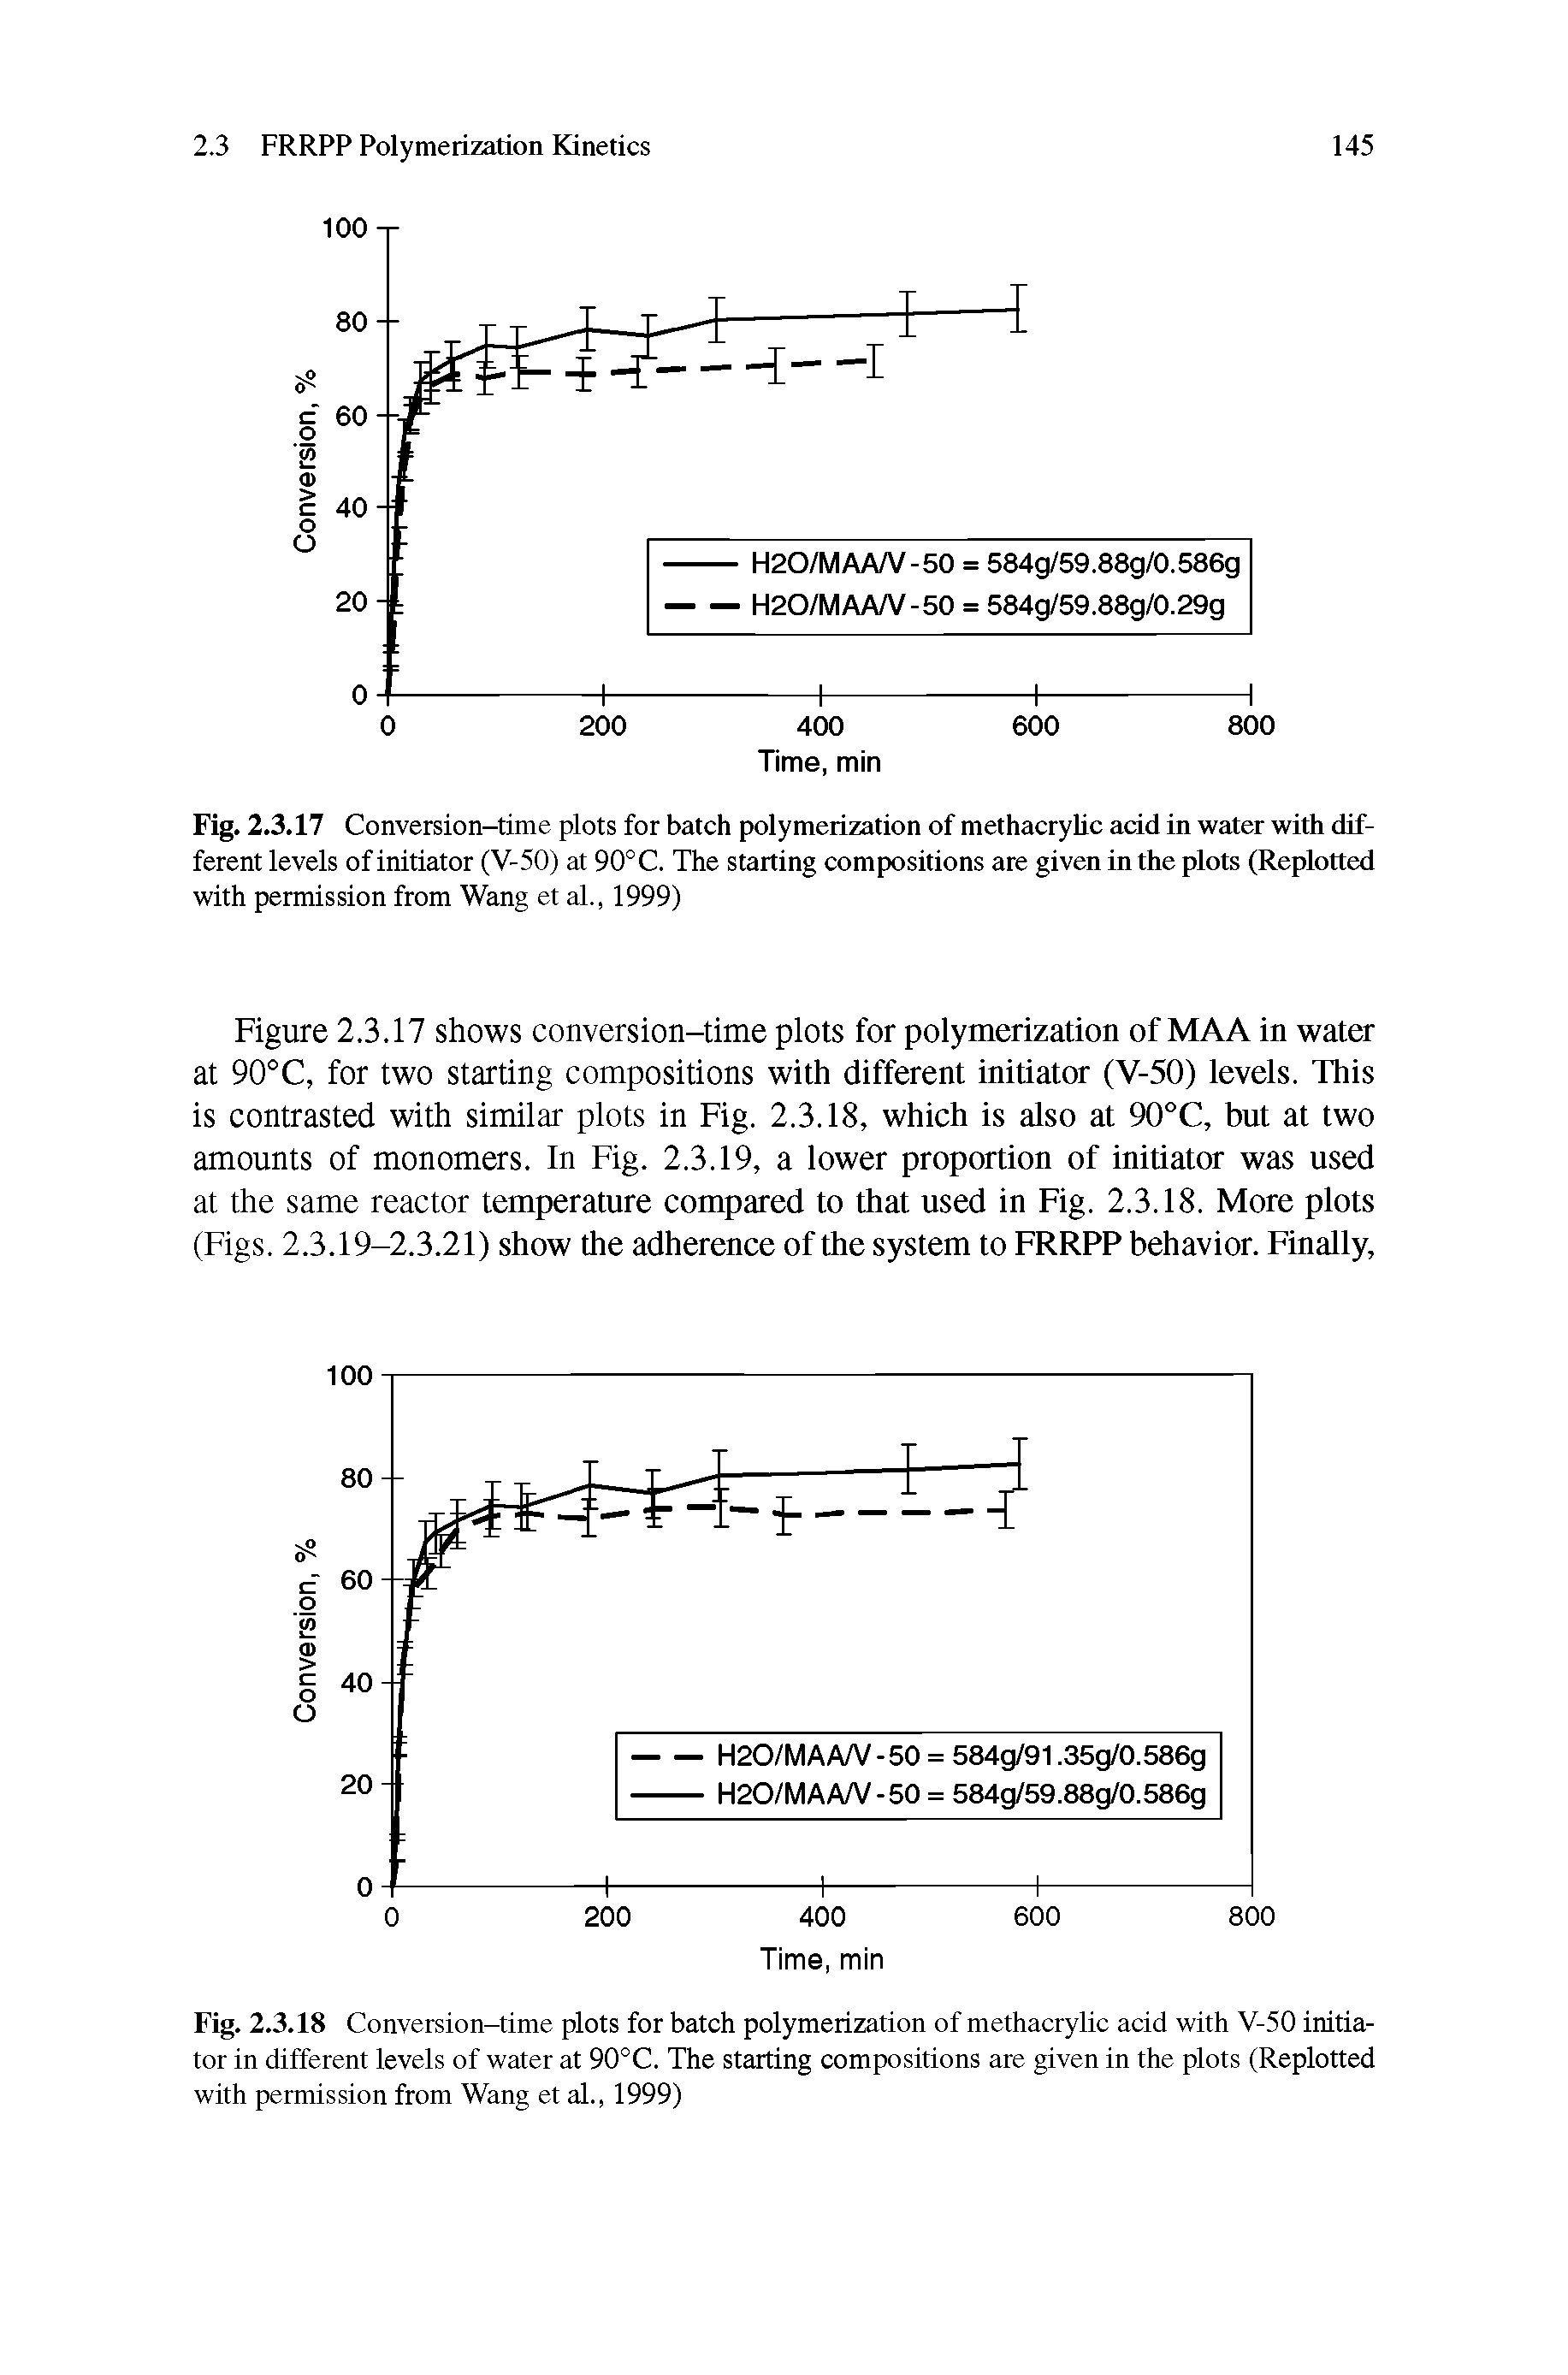 Figure 2.3.17 shows conversion-time plots for polymerization of MAA in water at 90°C, for two starting compositions with different initiator (V-50) levels. This is contrasted with similar plots in Fig. 2.3.18, which is also at 90°C, but at two amounts of monomers. In Fig. 2.3.19, a lower proportion of initiator was used at the same reactor temperature compared to that used in Fig. 2.3.18. More plots (Figs. 2.3.19-2.3.21) show the adherence of the system to FRRPP behavior. Finally,...